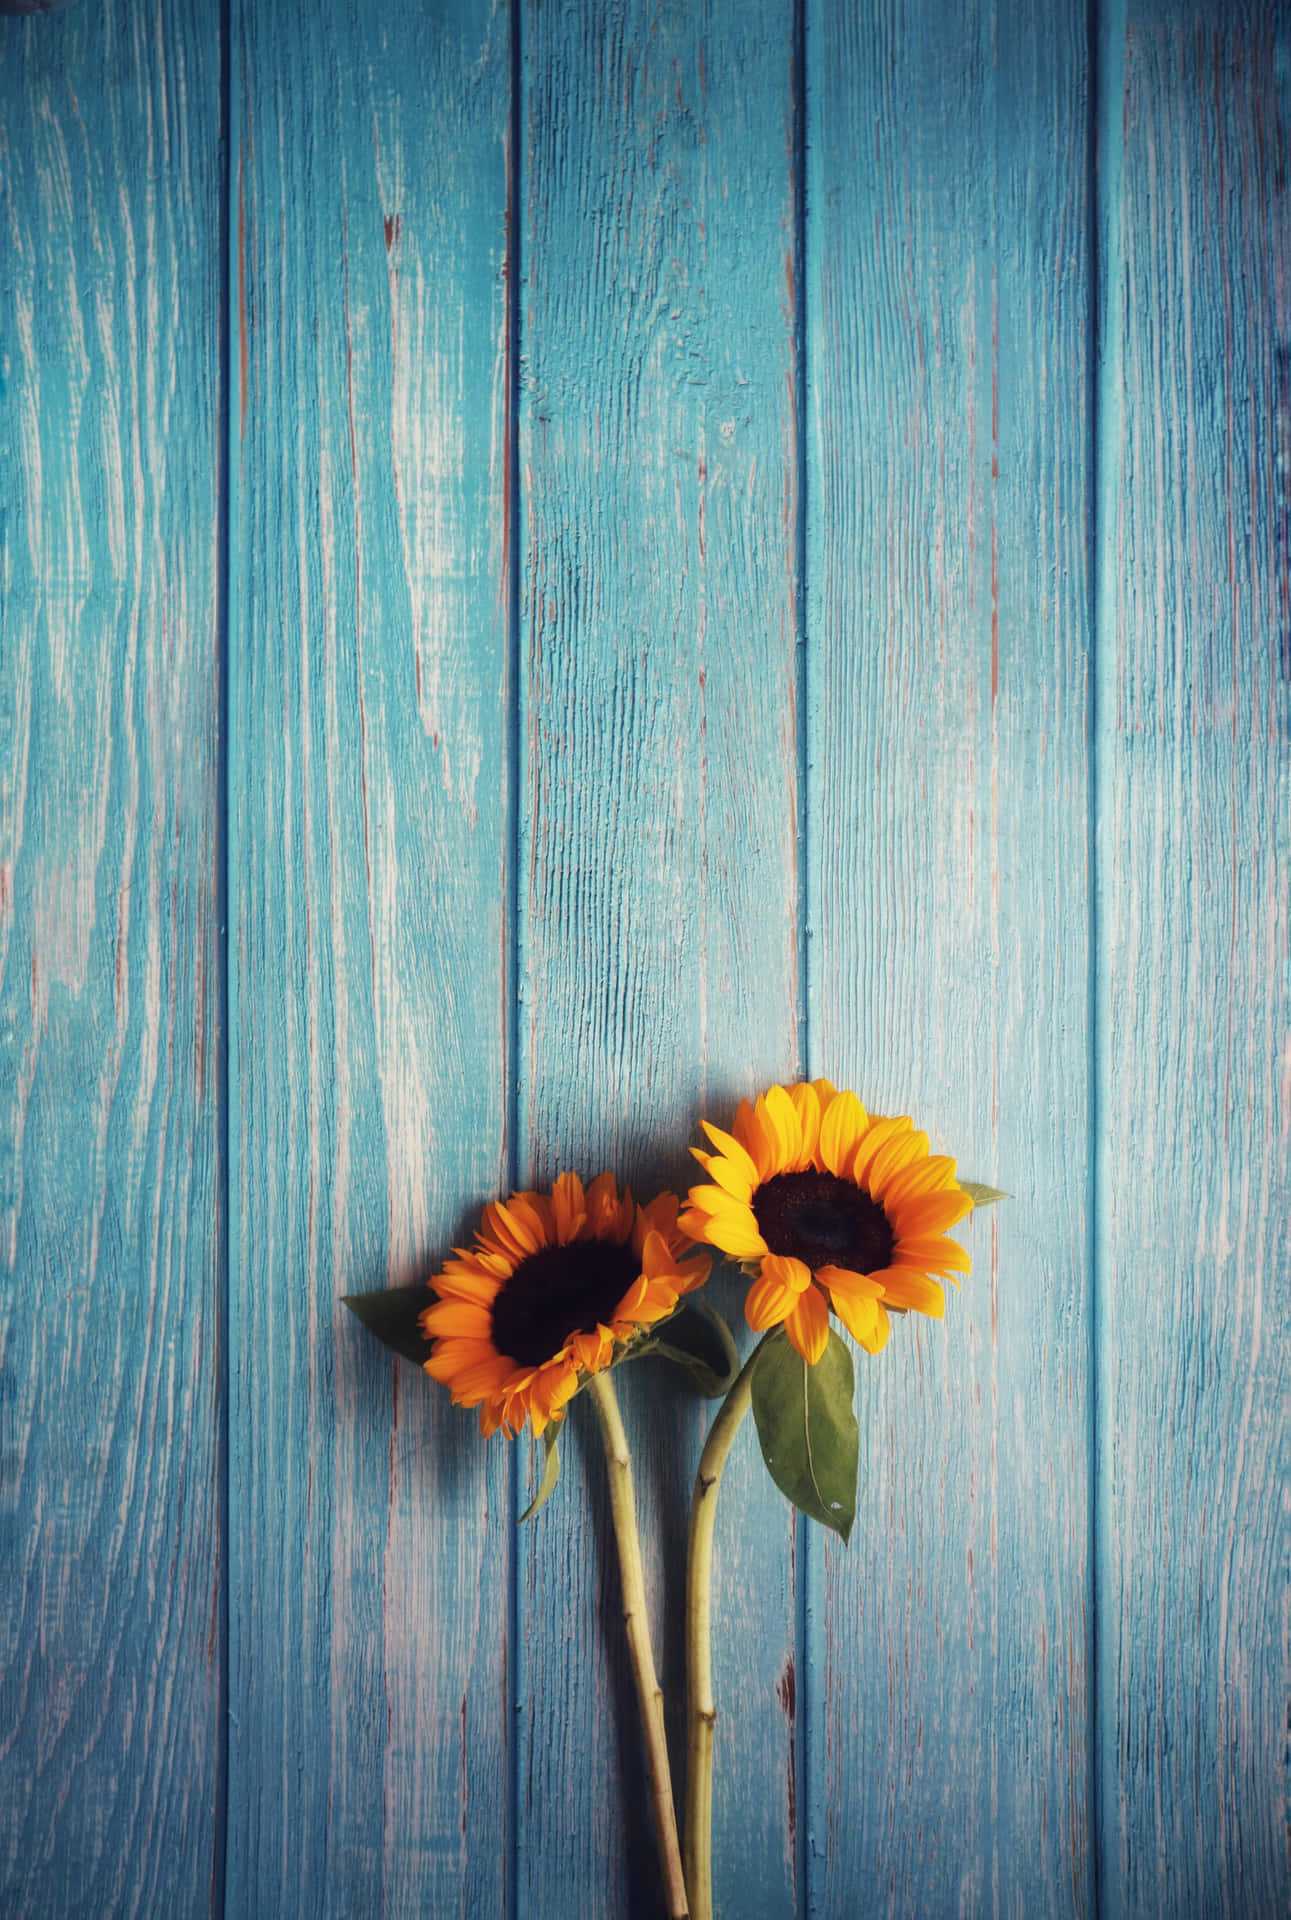 Wooden Table With Sunflower Phone Wallpaper